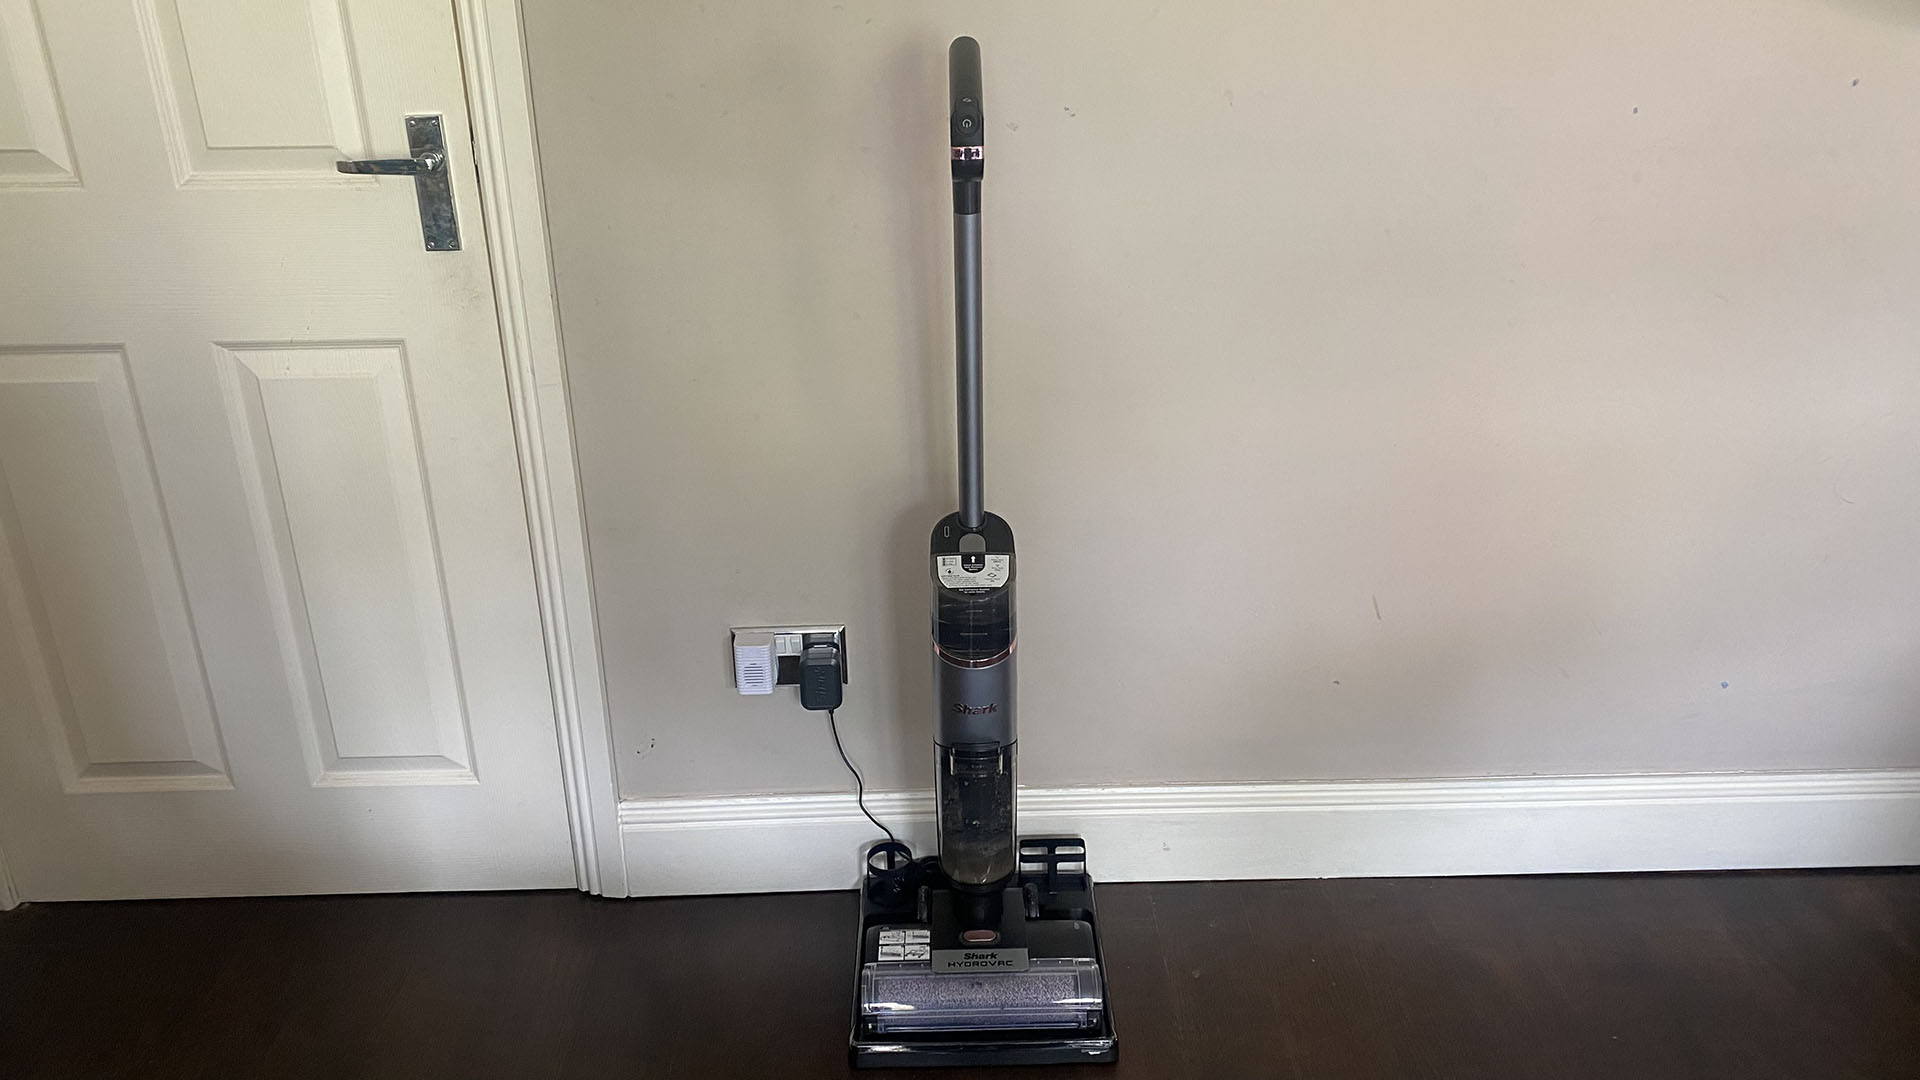 Shark HydroVac Cordless floor cleaner plugged in and charging